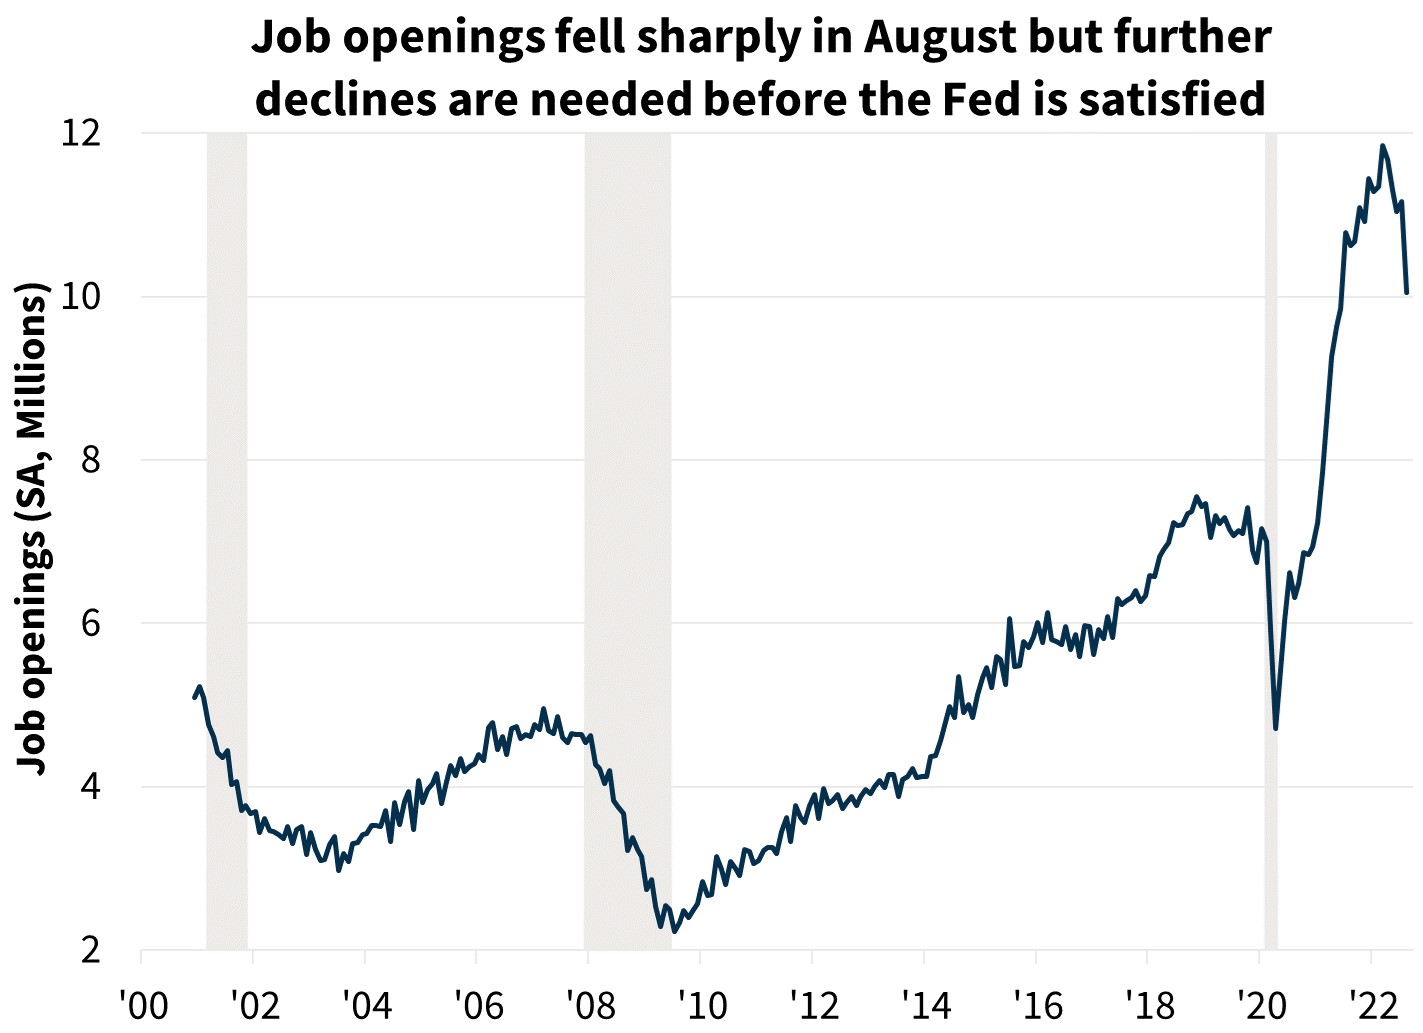  Job openings fell sharply in August but further declines are needed before the Fed is satisfied 